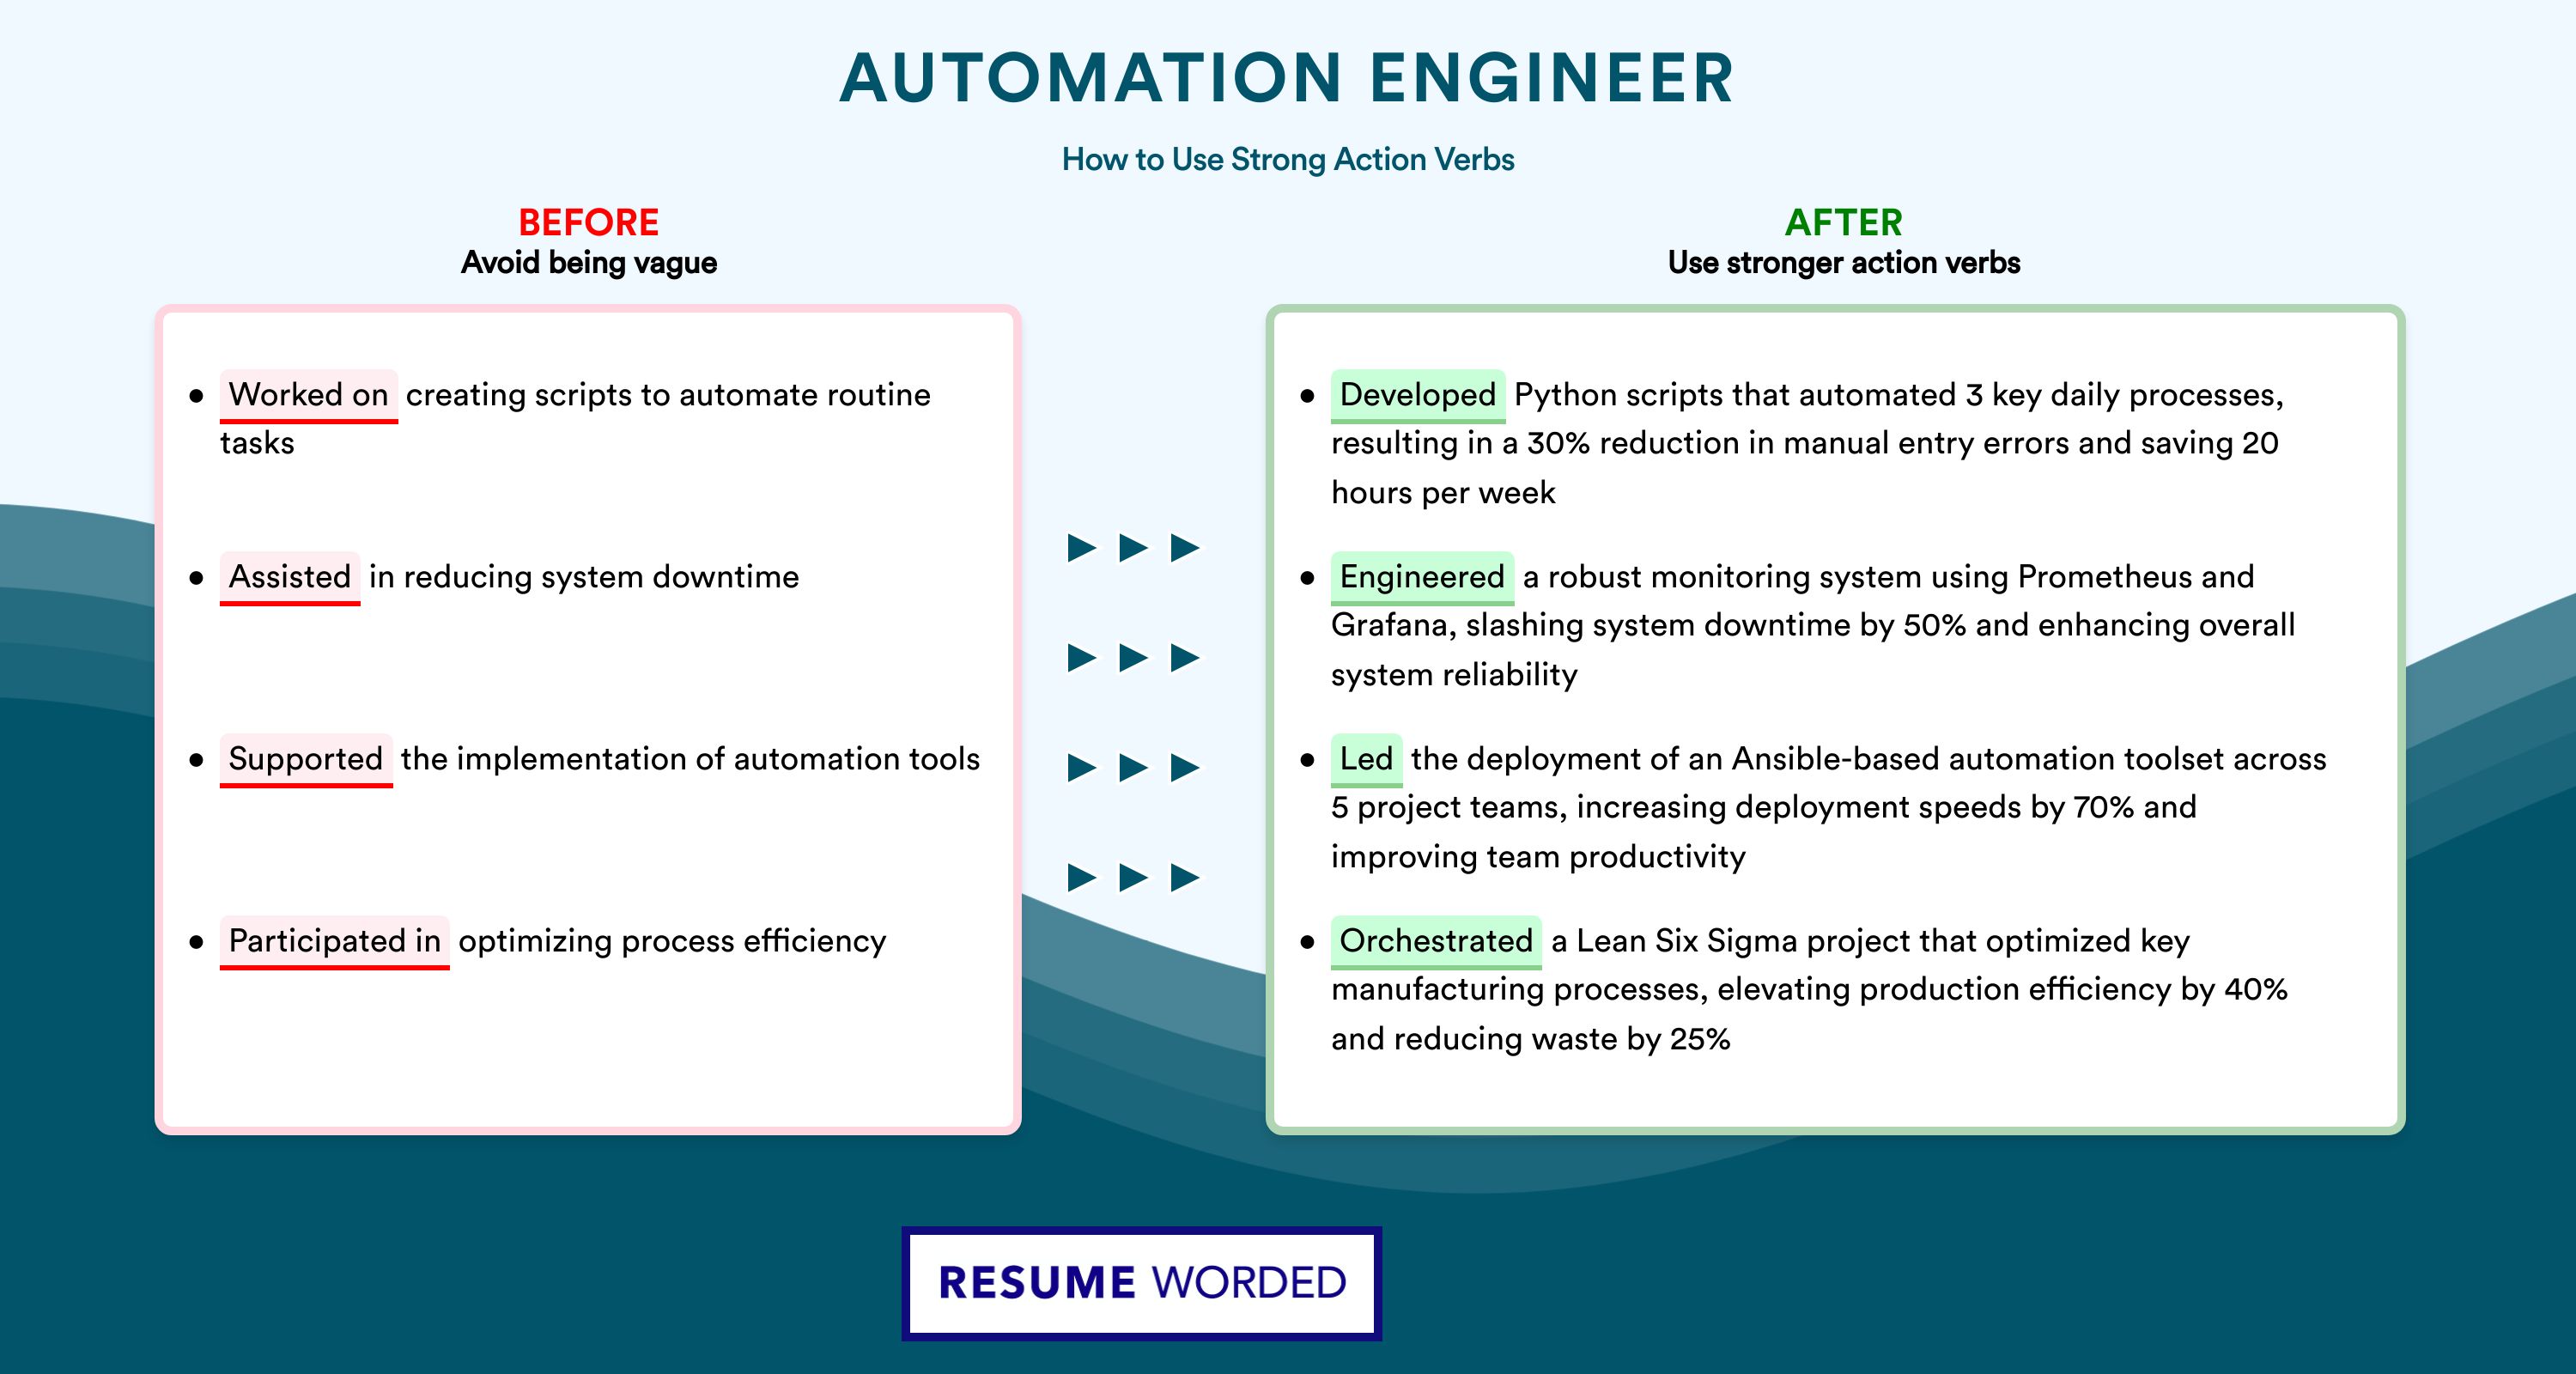 Action Verbs for Automation Engineer